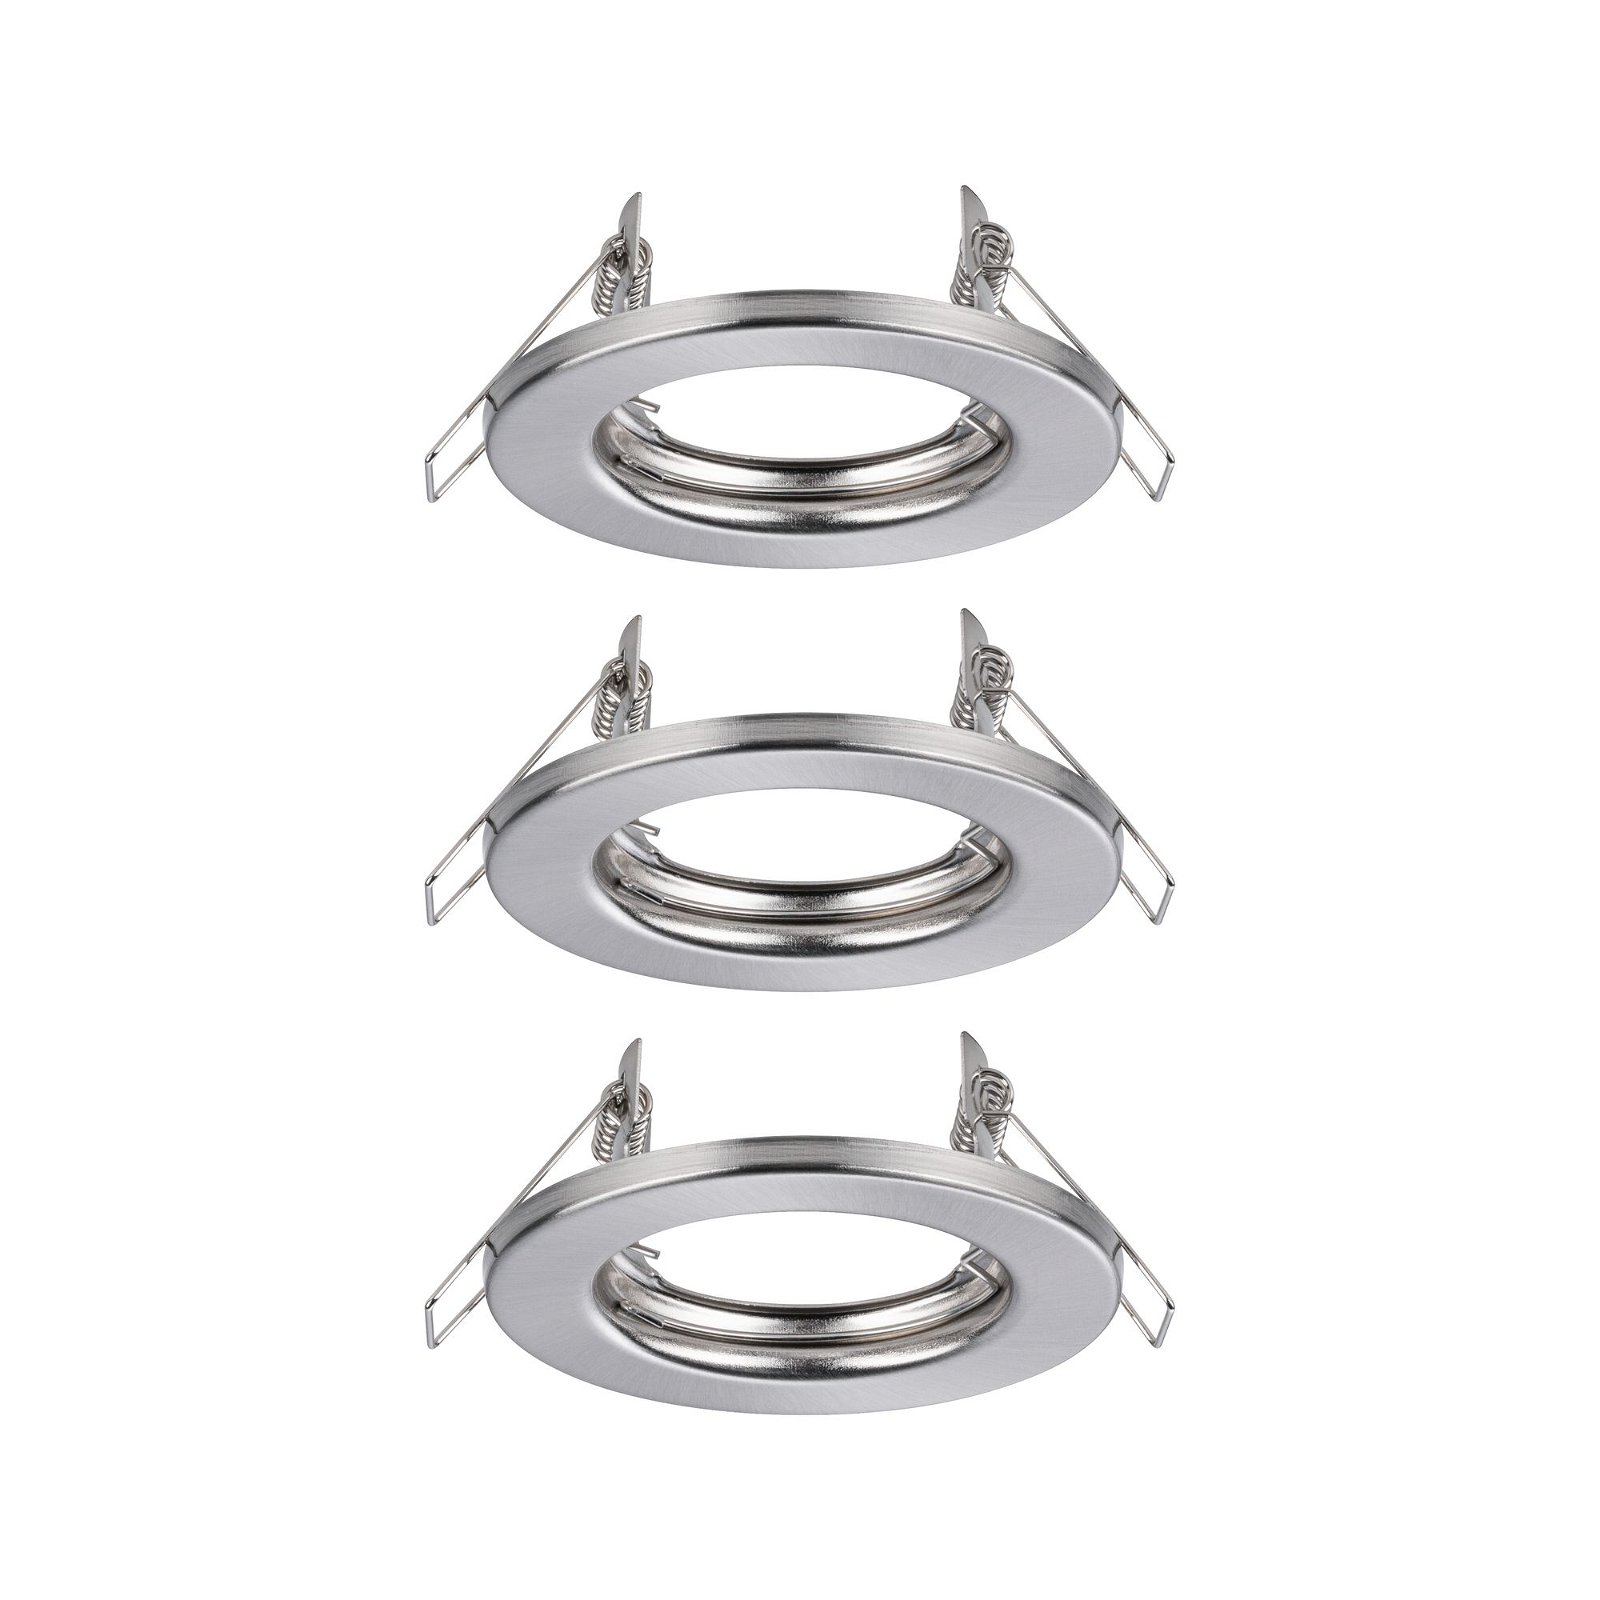 Recessed luminaire 3-piece set Rigid round 80mm GU10 max. 3x10W 230V dimmable Brushed iron